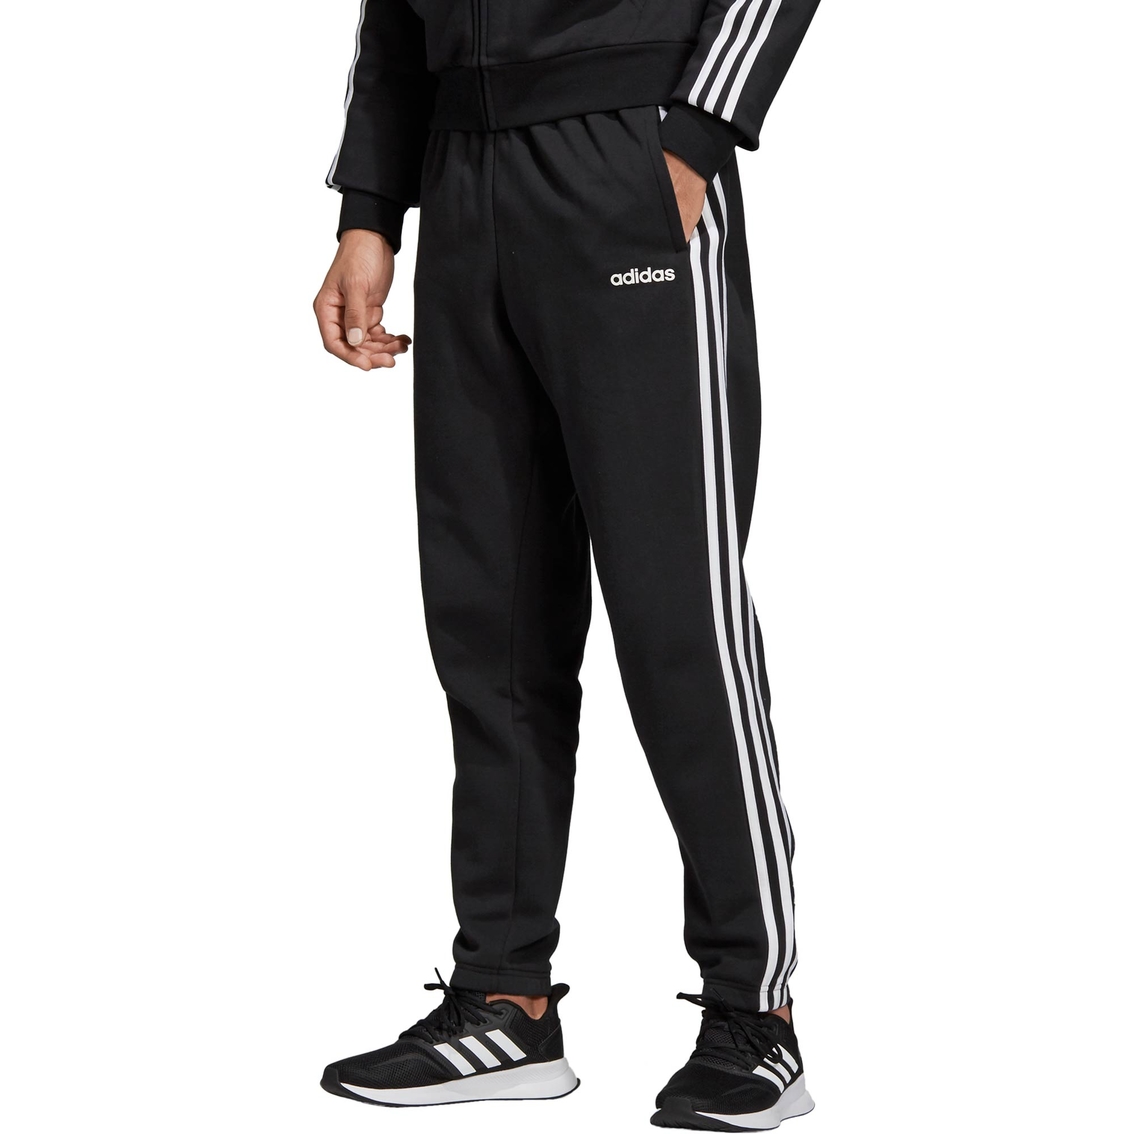 Adidas Essentials 3 Stripe Tapered Pants | Pants | Clothing ...